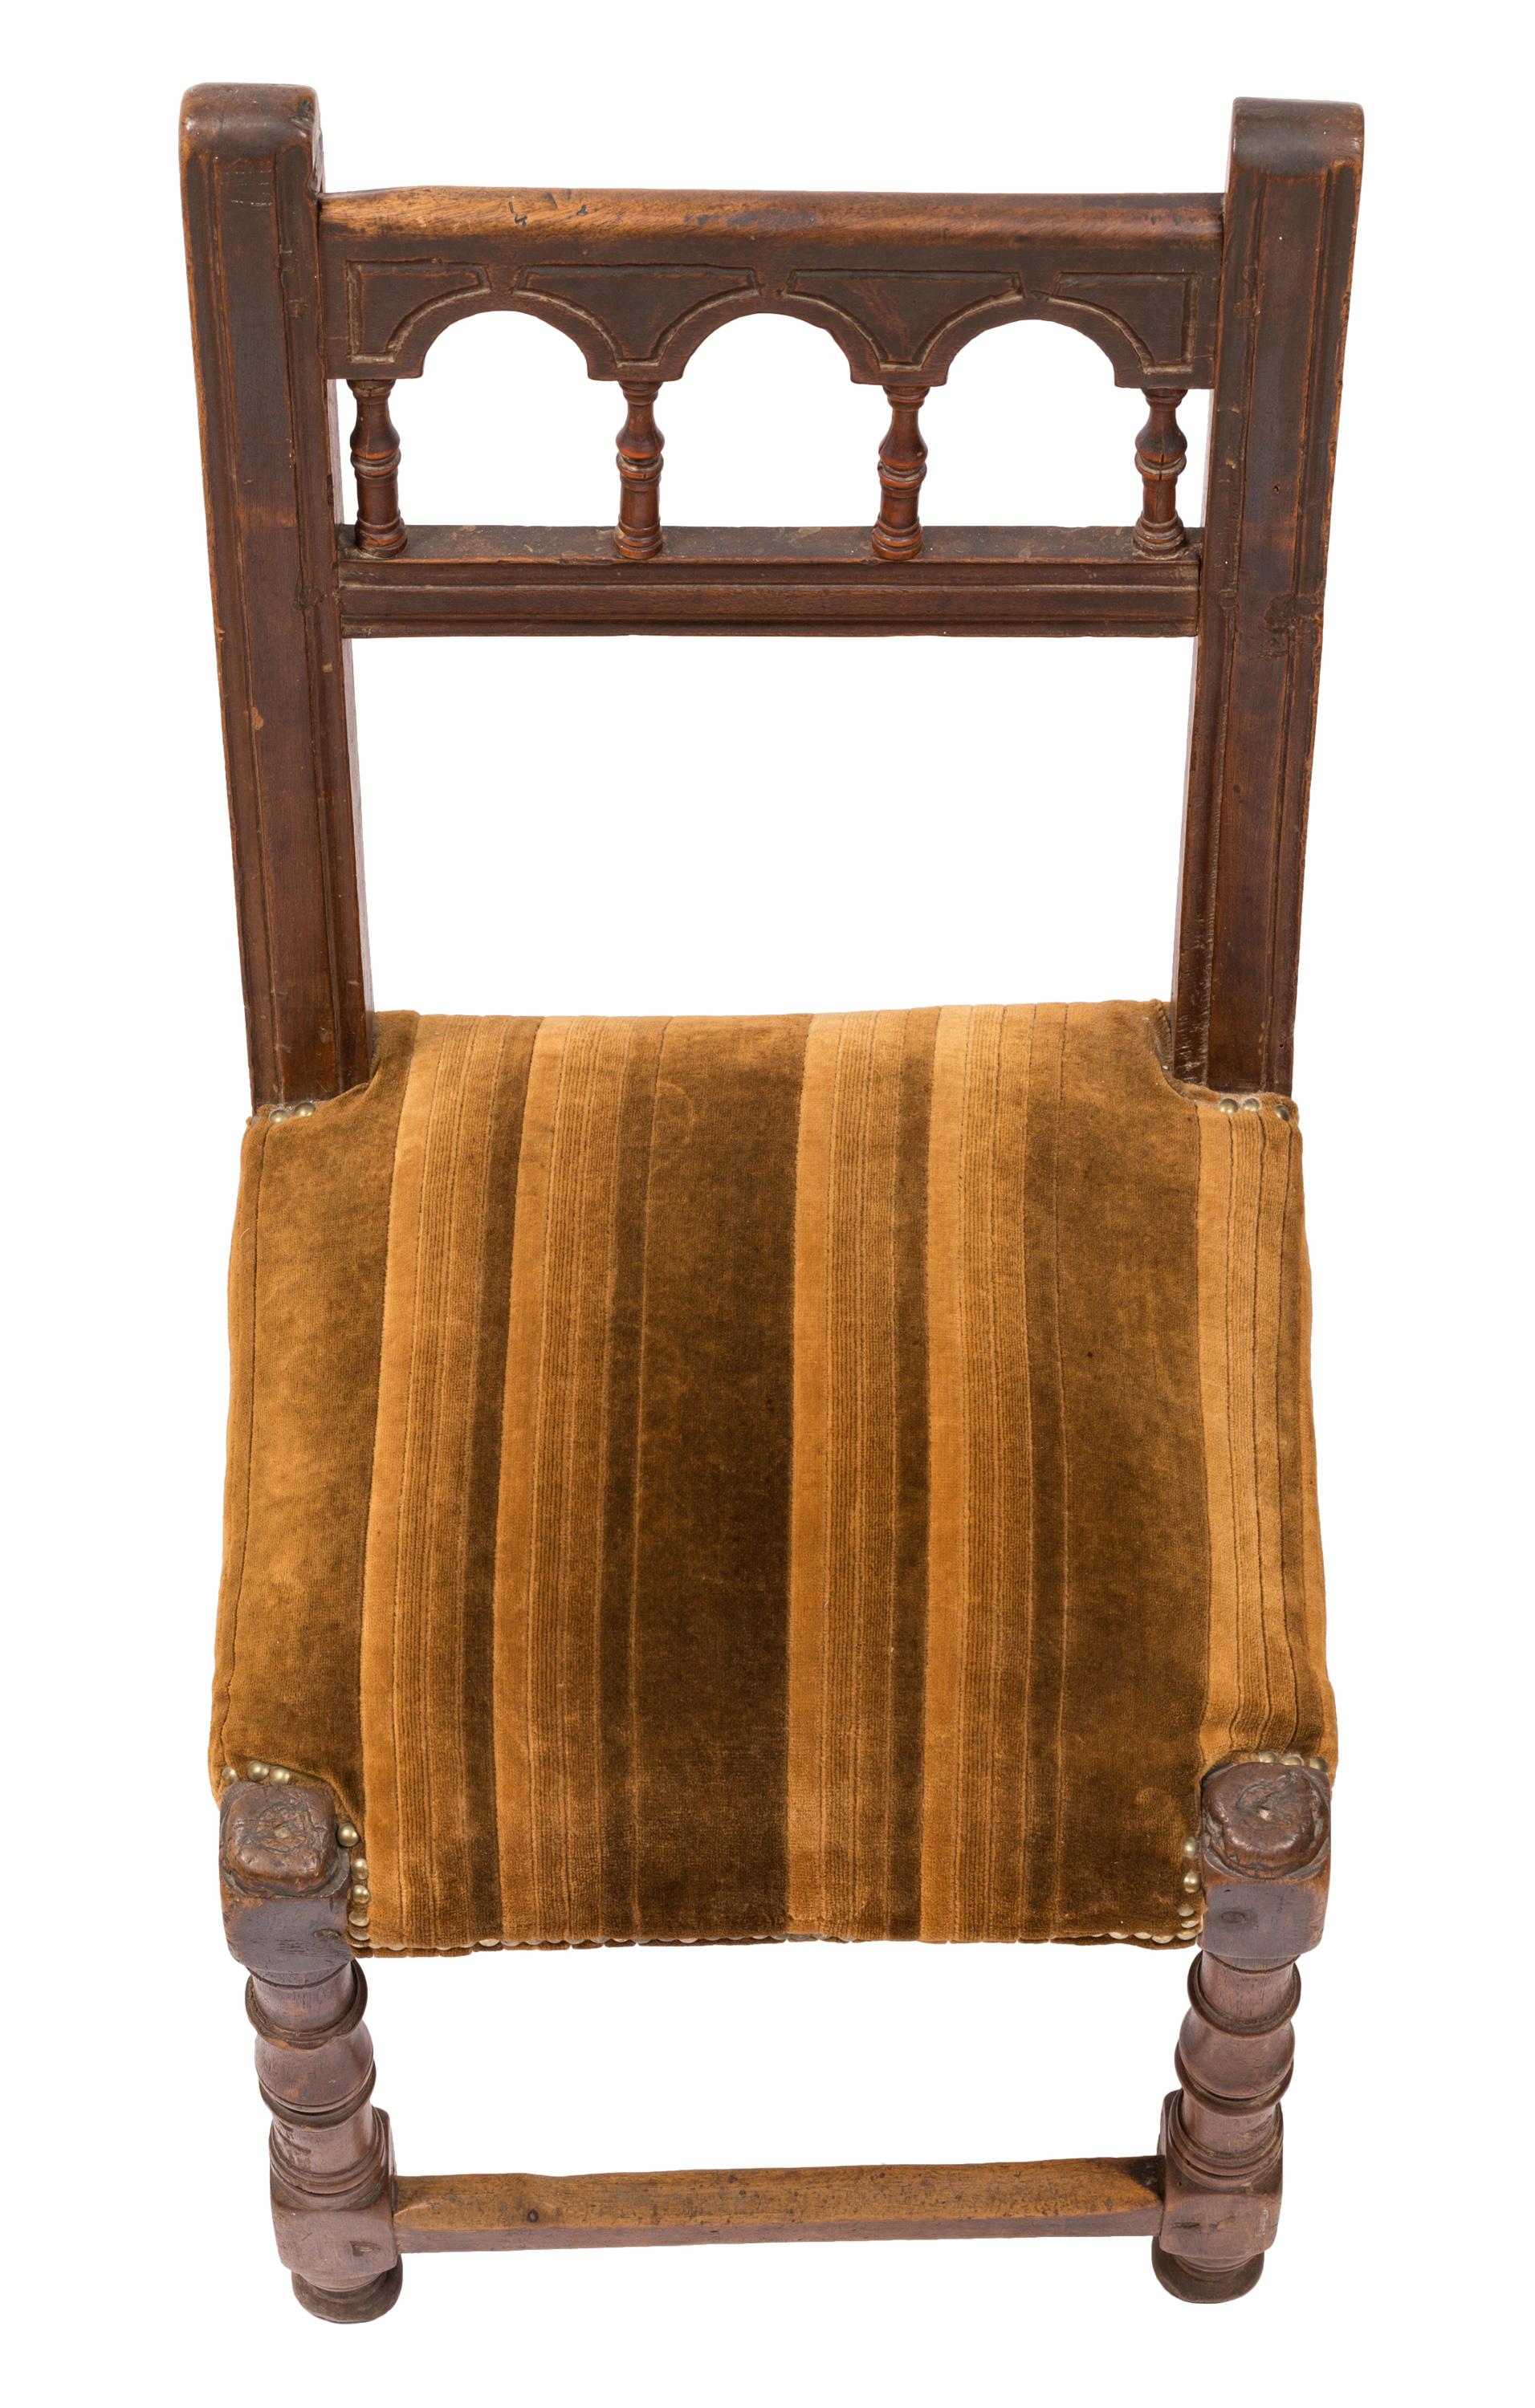 Upholstery Set of Antique Handmade, Upholstered Rustic Wood Chairs from Northern Spain For Sale